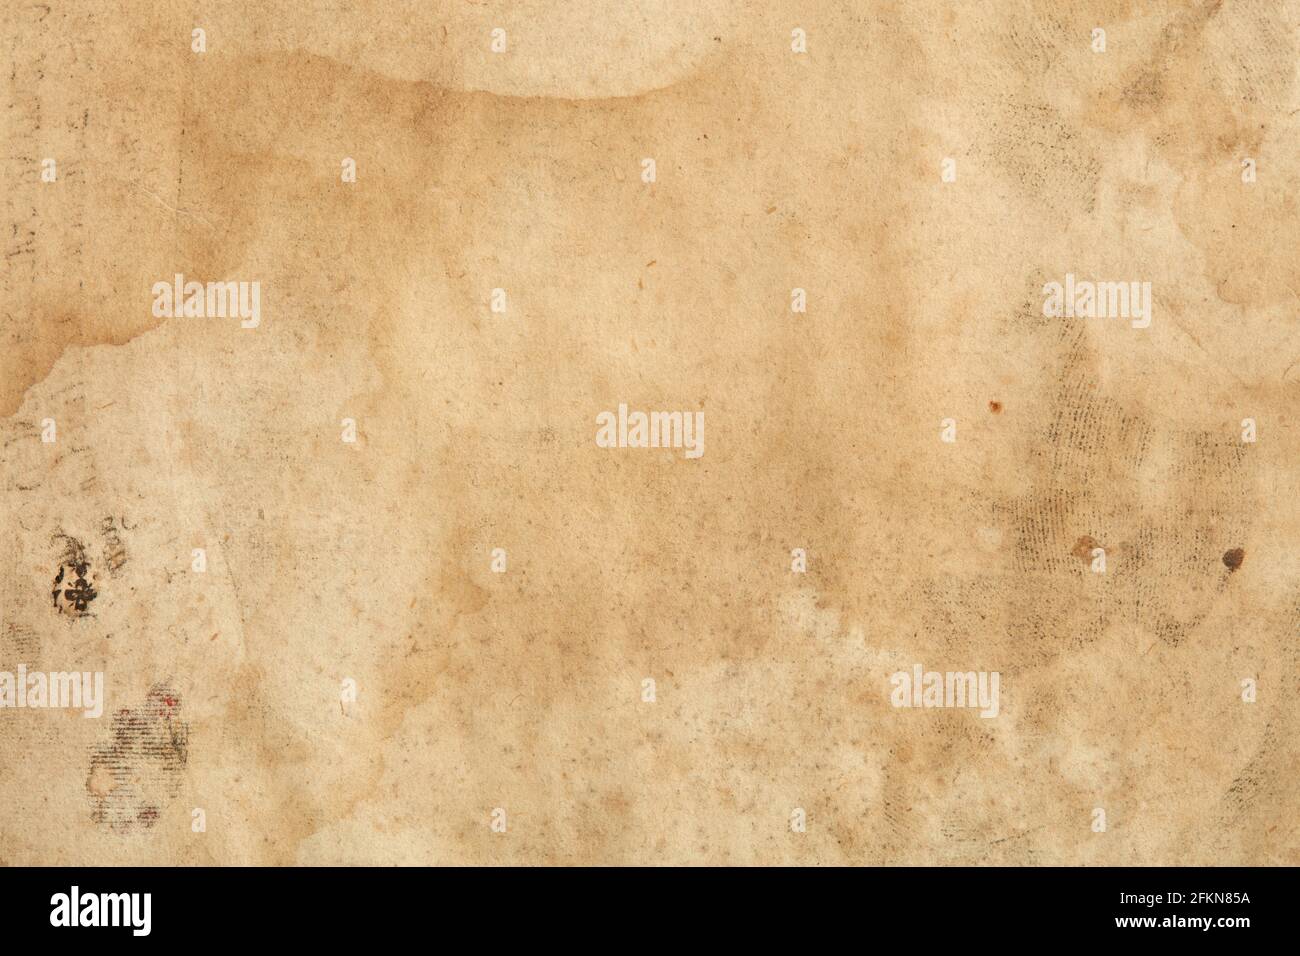 https://c8.alamy.com/comp/2FKN85A/old-paper-with-humidity-sings-and-faded-writing-texture-background-2FKN85A.jpg